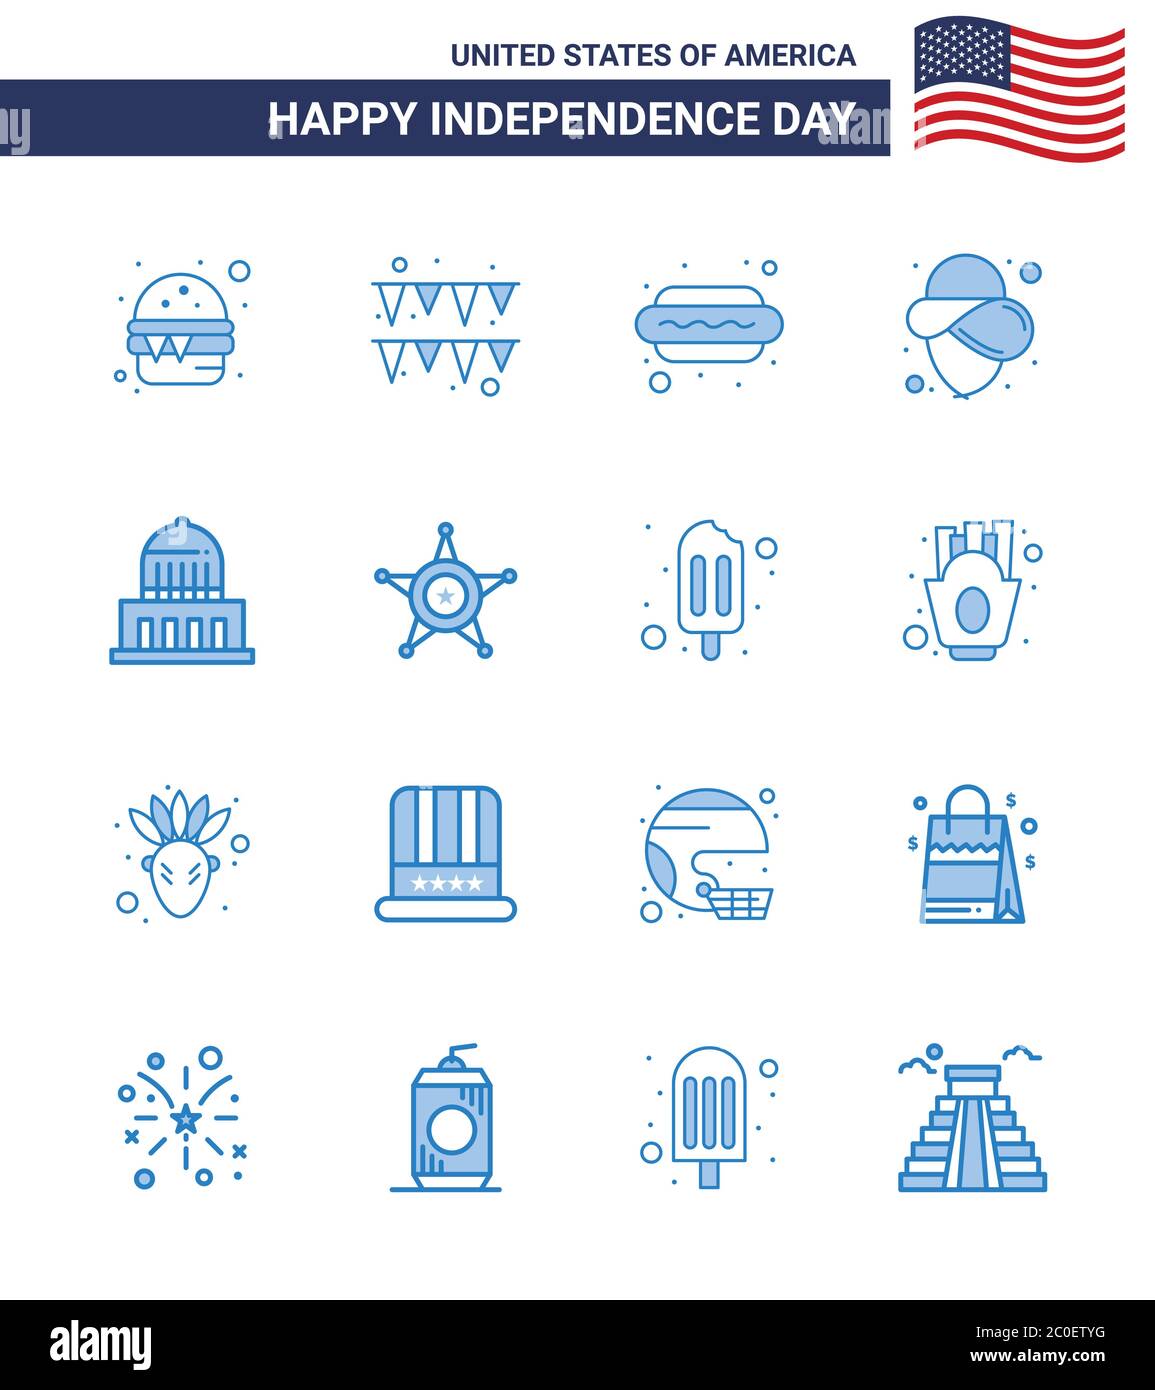 Modern Set of 16 Blues and symbols on USA Independence Day such as usa; city; dog; building; cowboy Editable USA Day Vector Design Elements Stock Vector